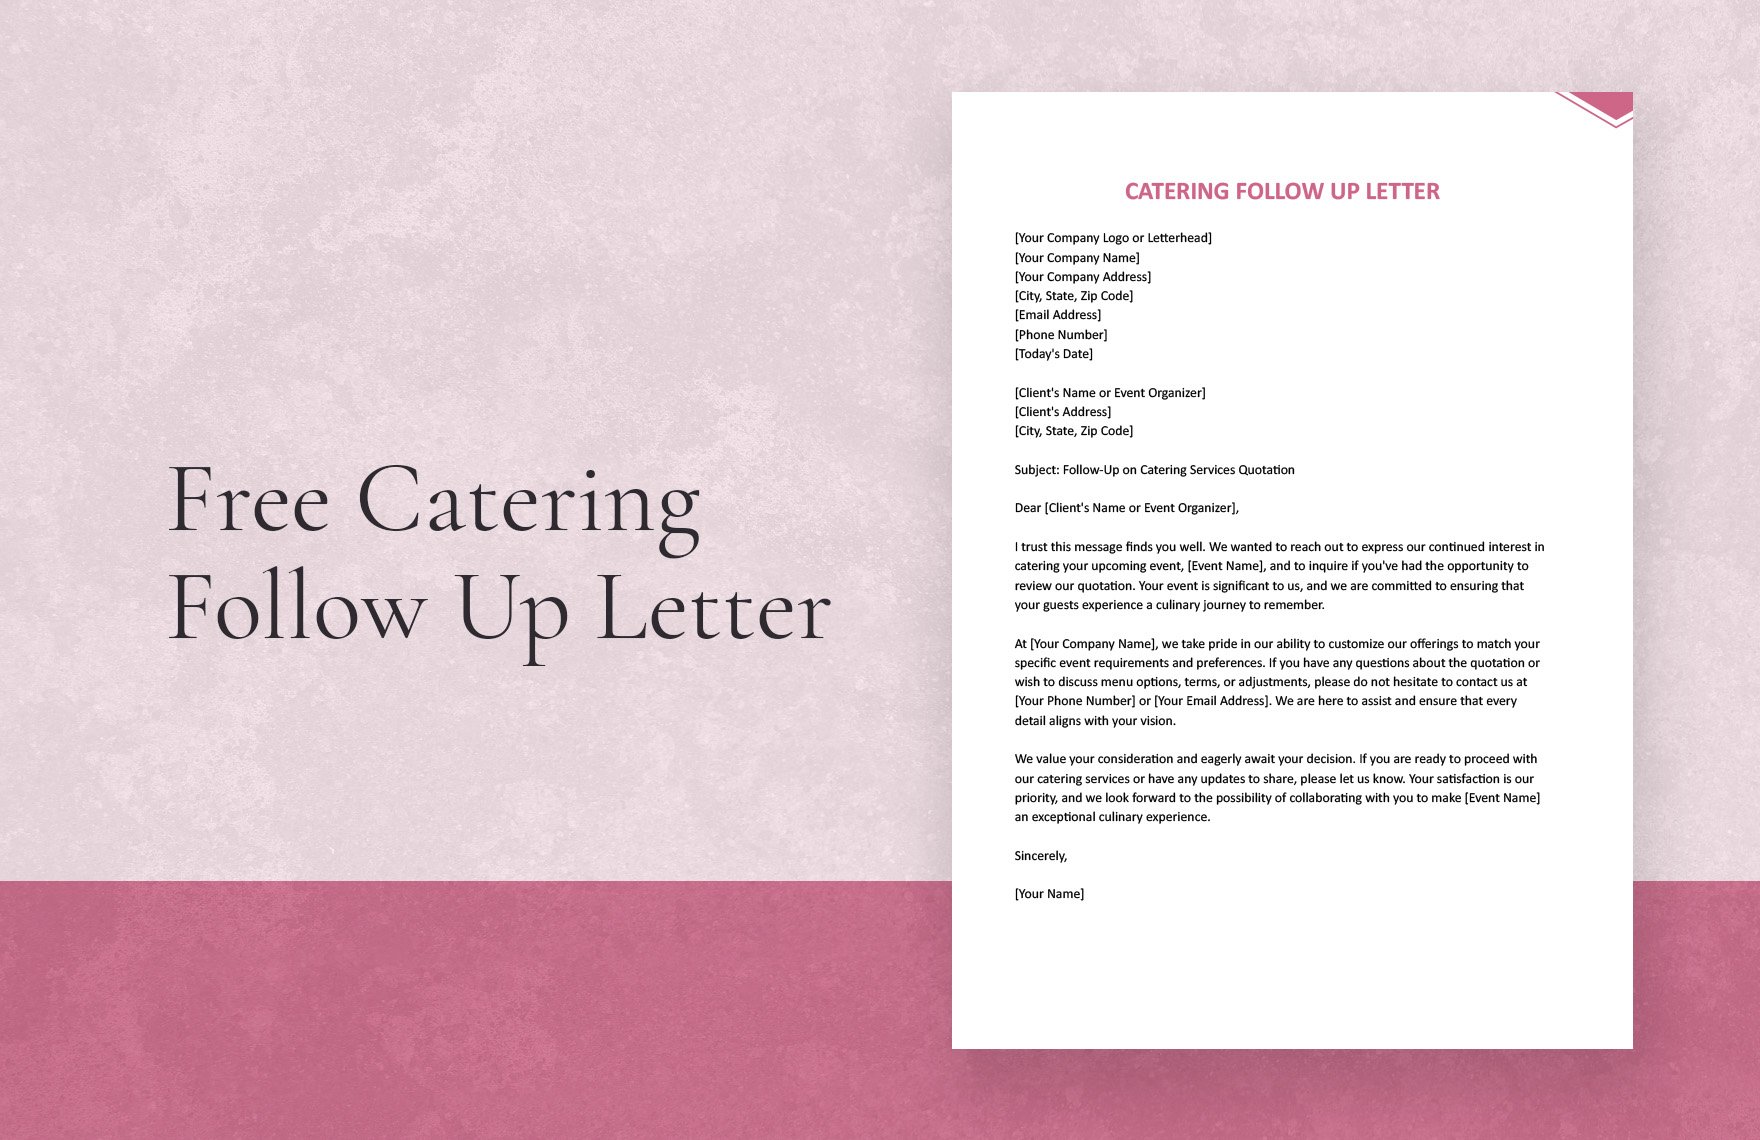 Free Catering Follow Up Letter